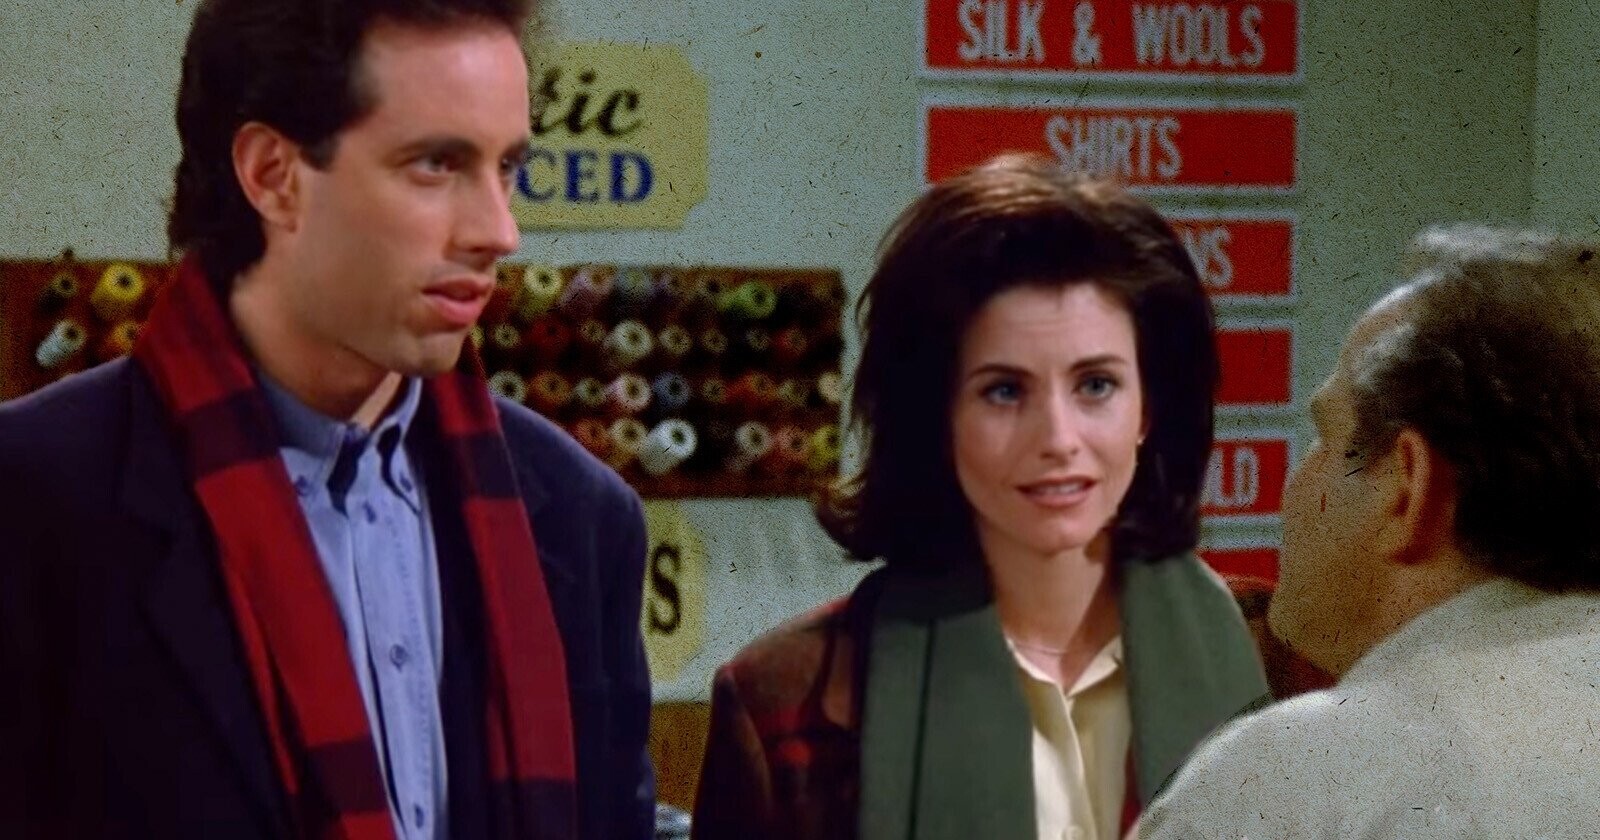 Seinfeld': All the Reasons Jerry Dumped a Woman, Ranked by Pettiness